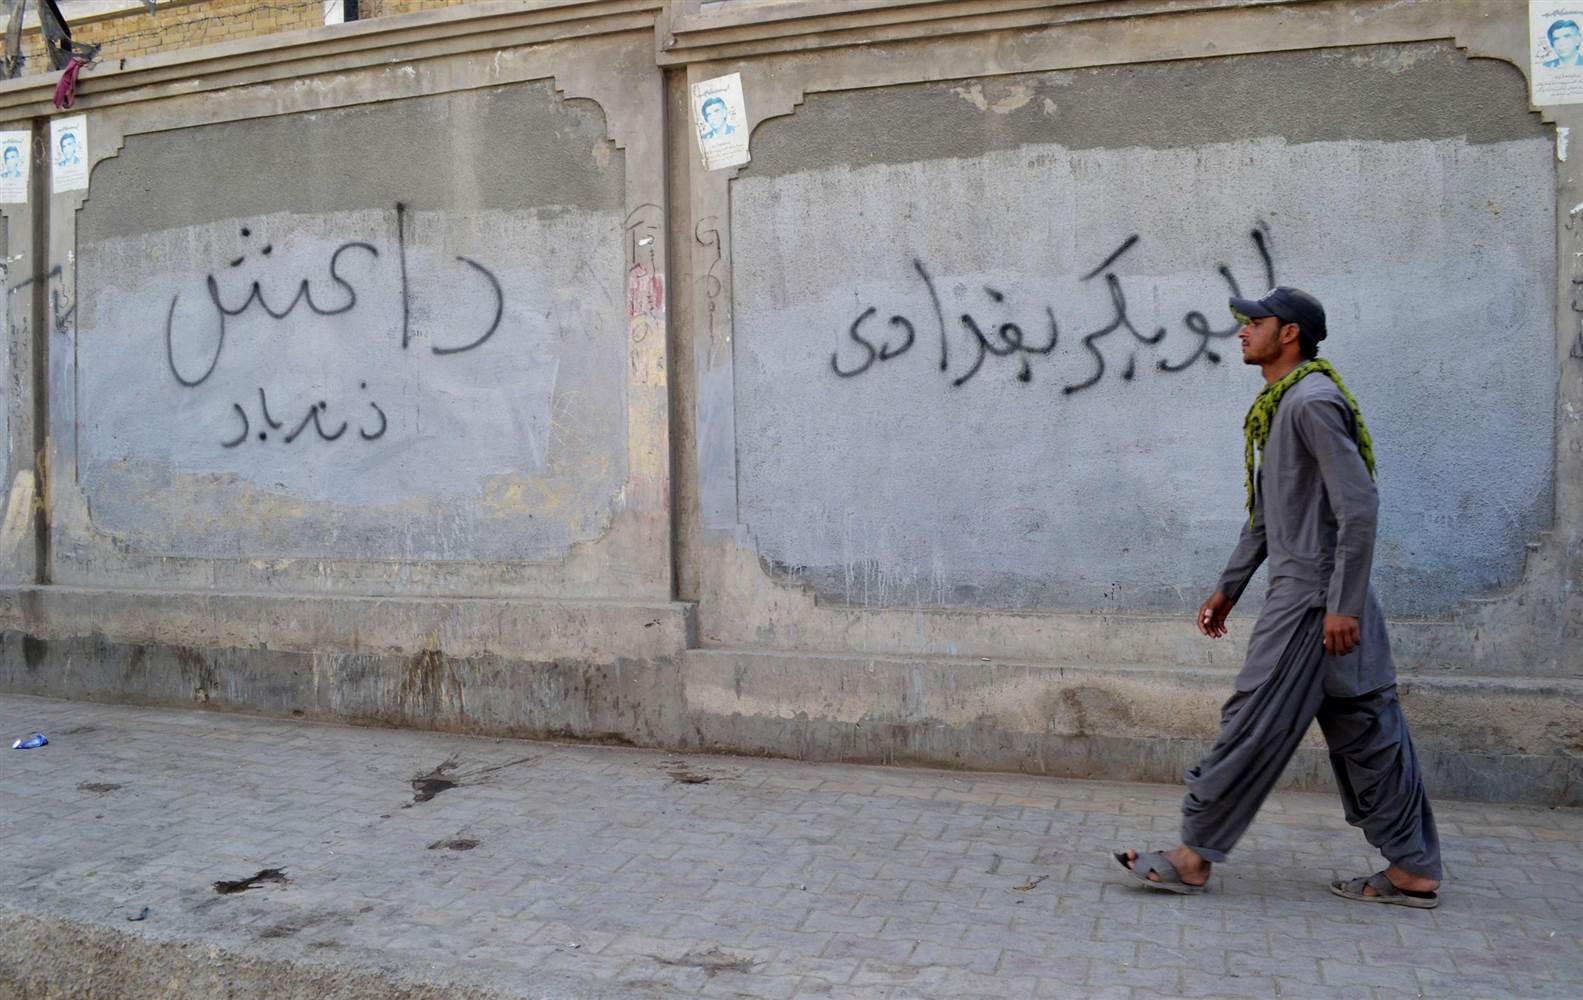 ISIS wall chalking in Quetta